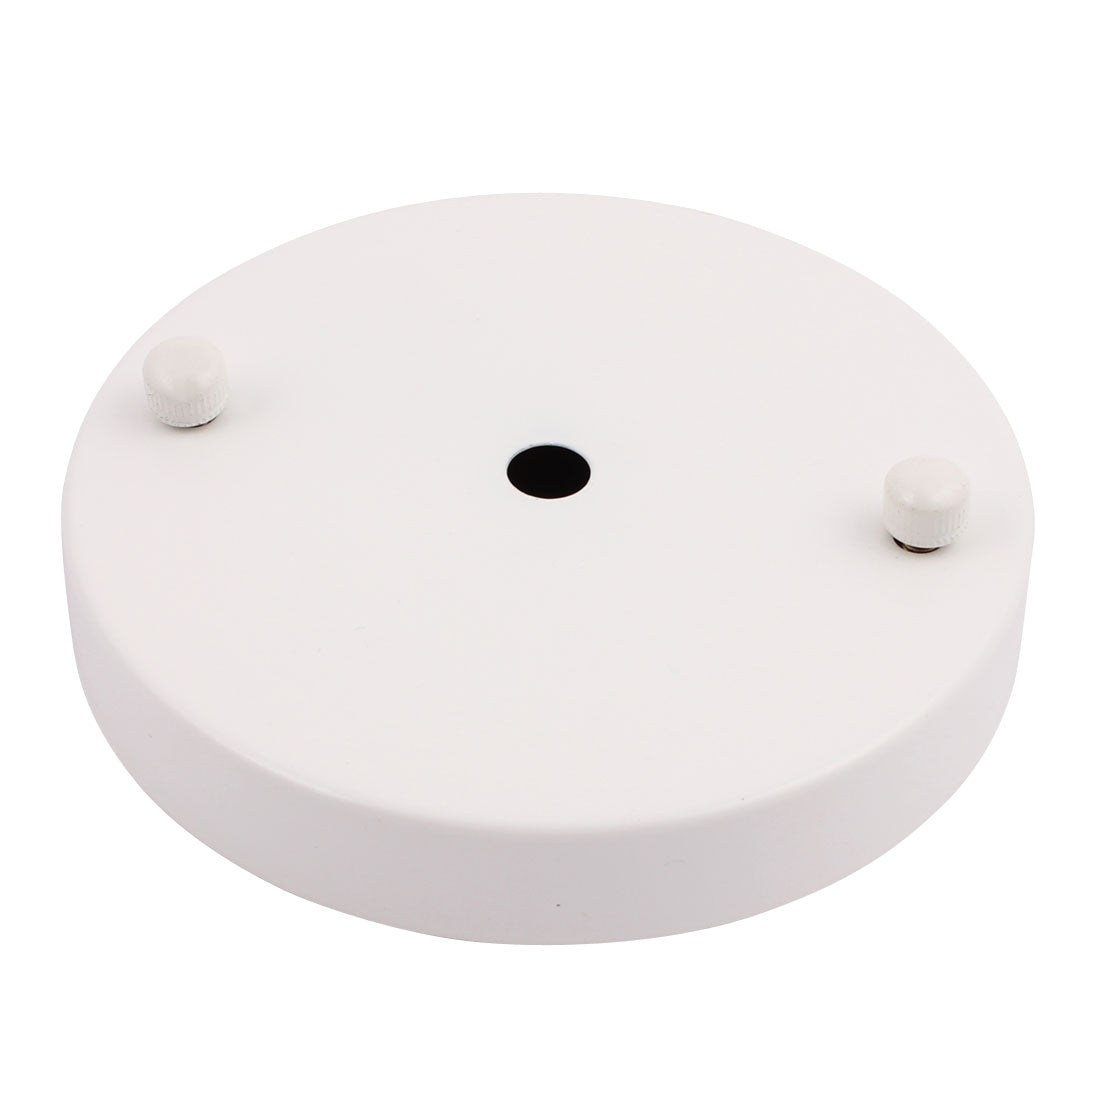 uxcell Uxcell 120mmx20mm Ceiling Plate Chassis Disc Round Base Pendant Light Accessories White